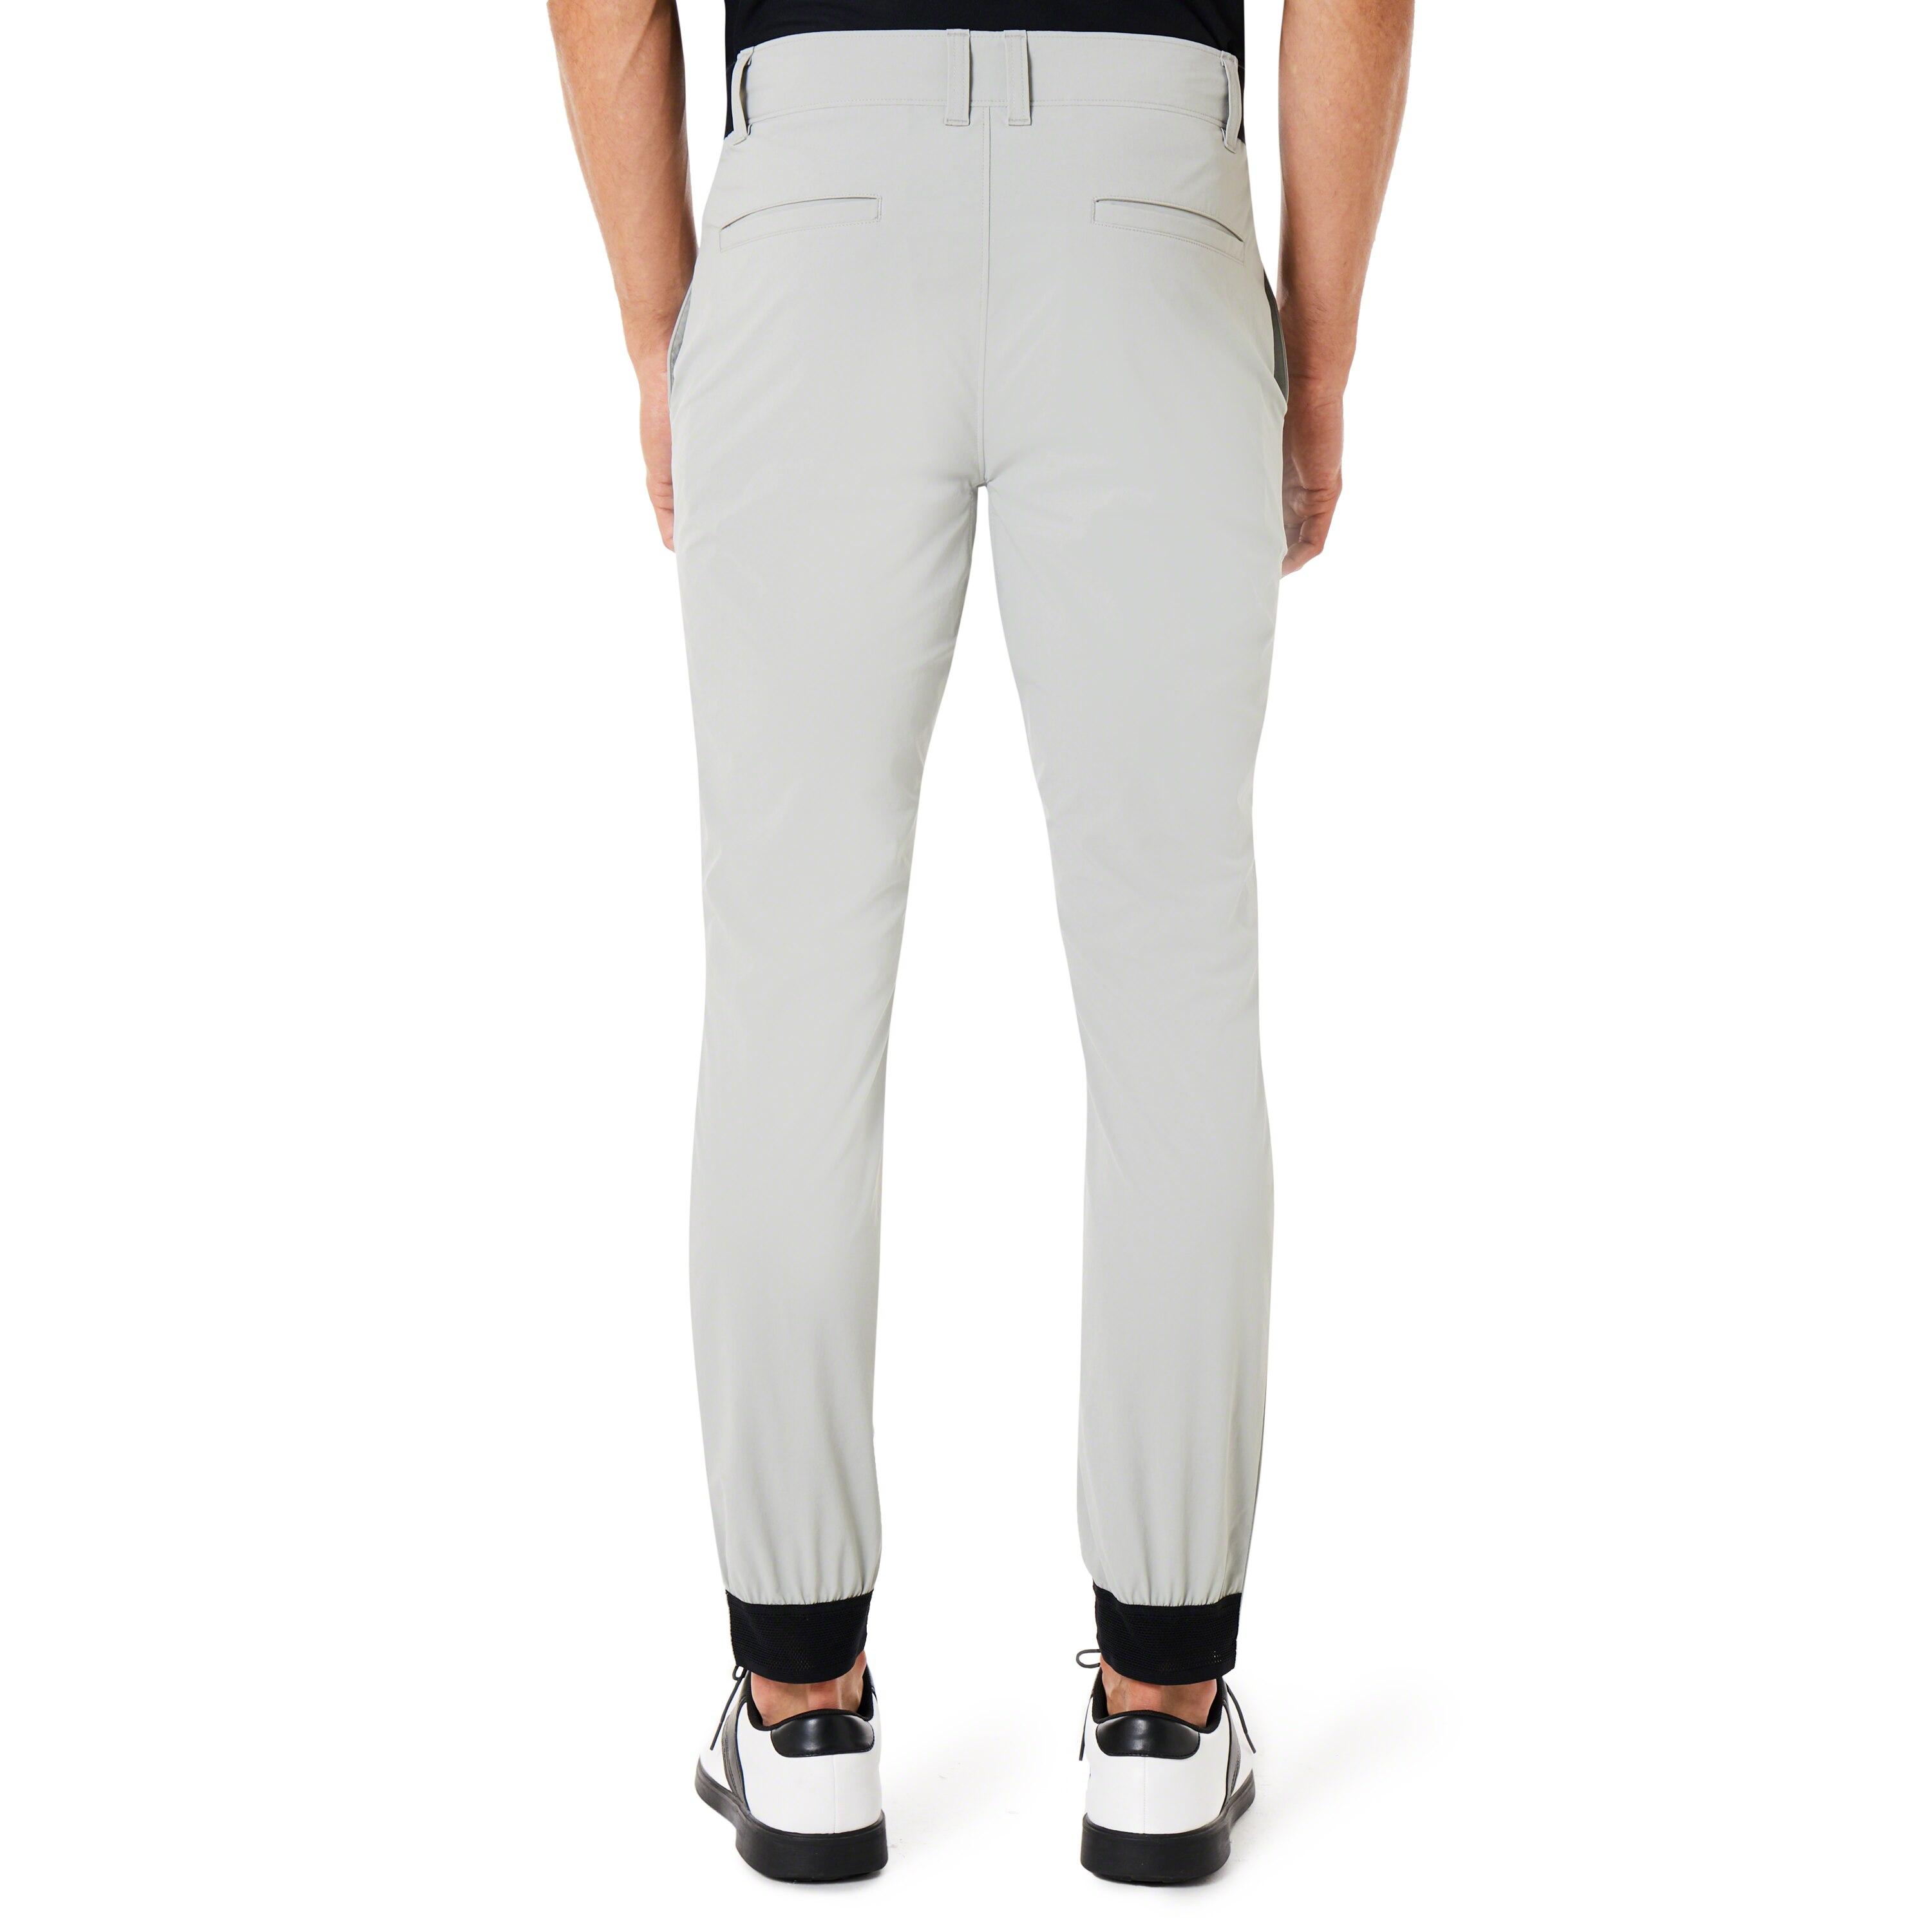 oakley tapered golf pants